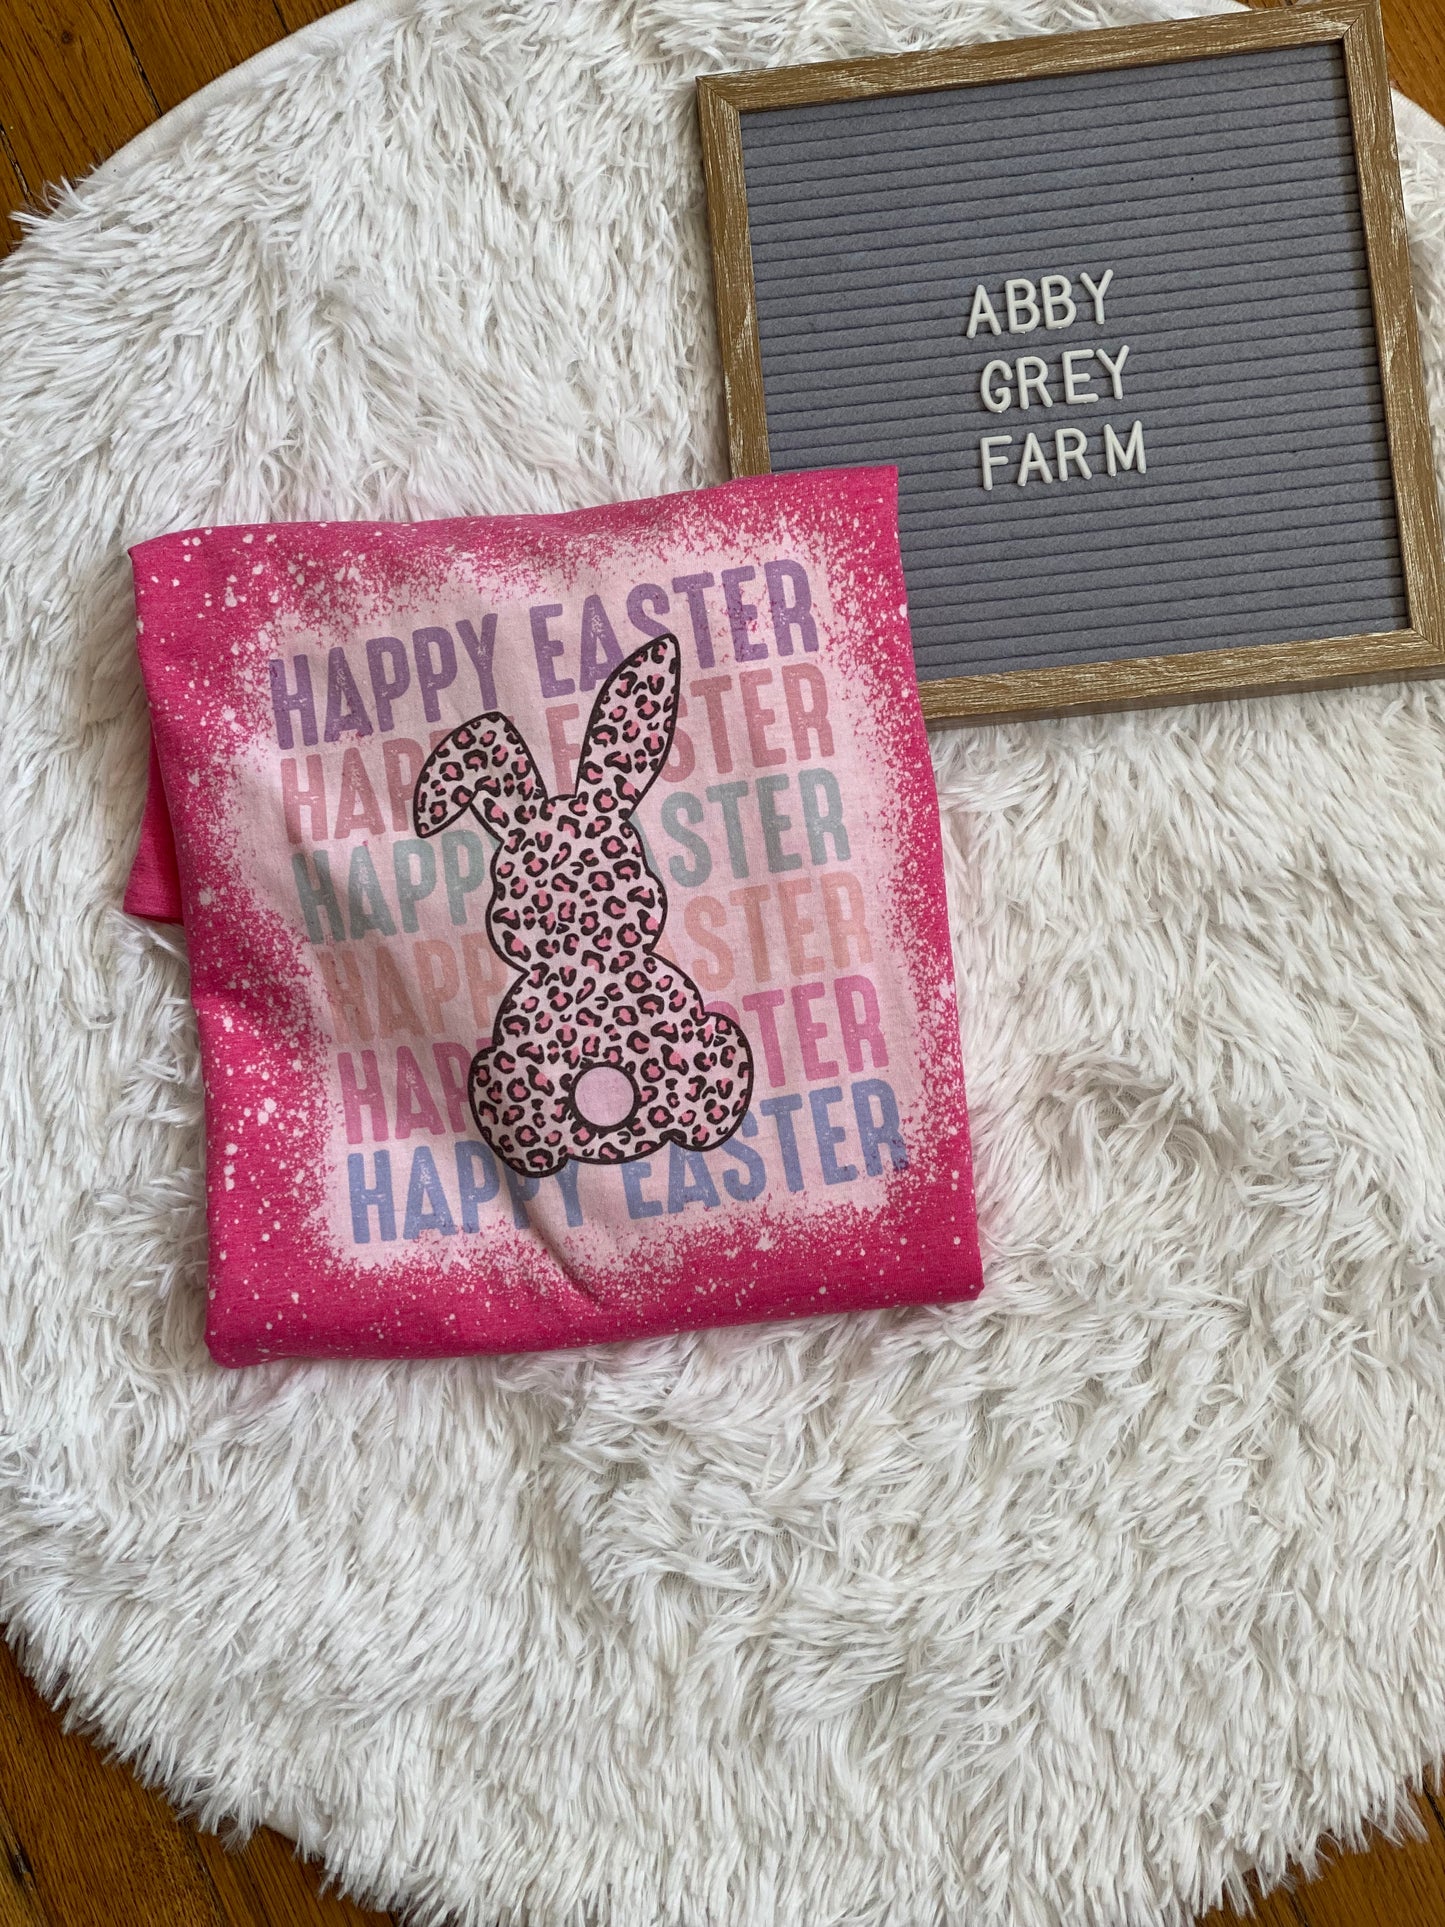 Bleached Tee- Happy Easter bunny